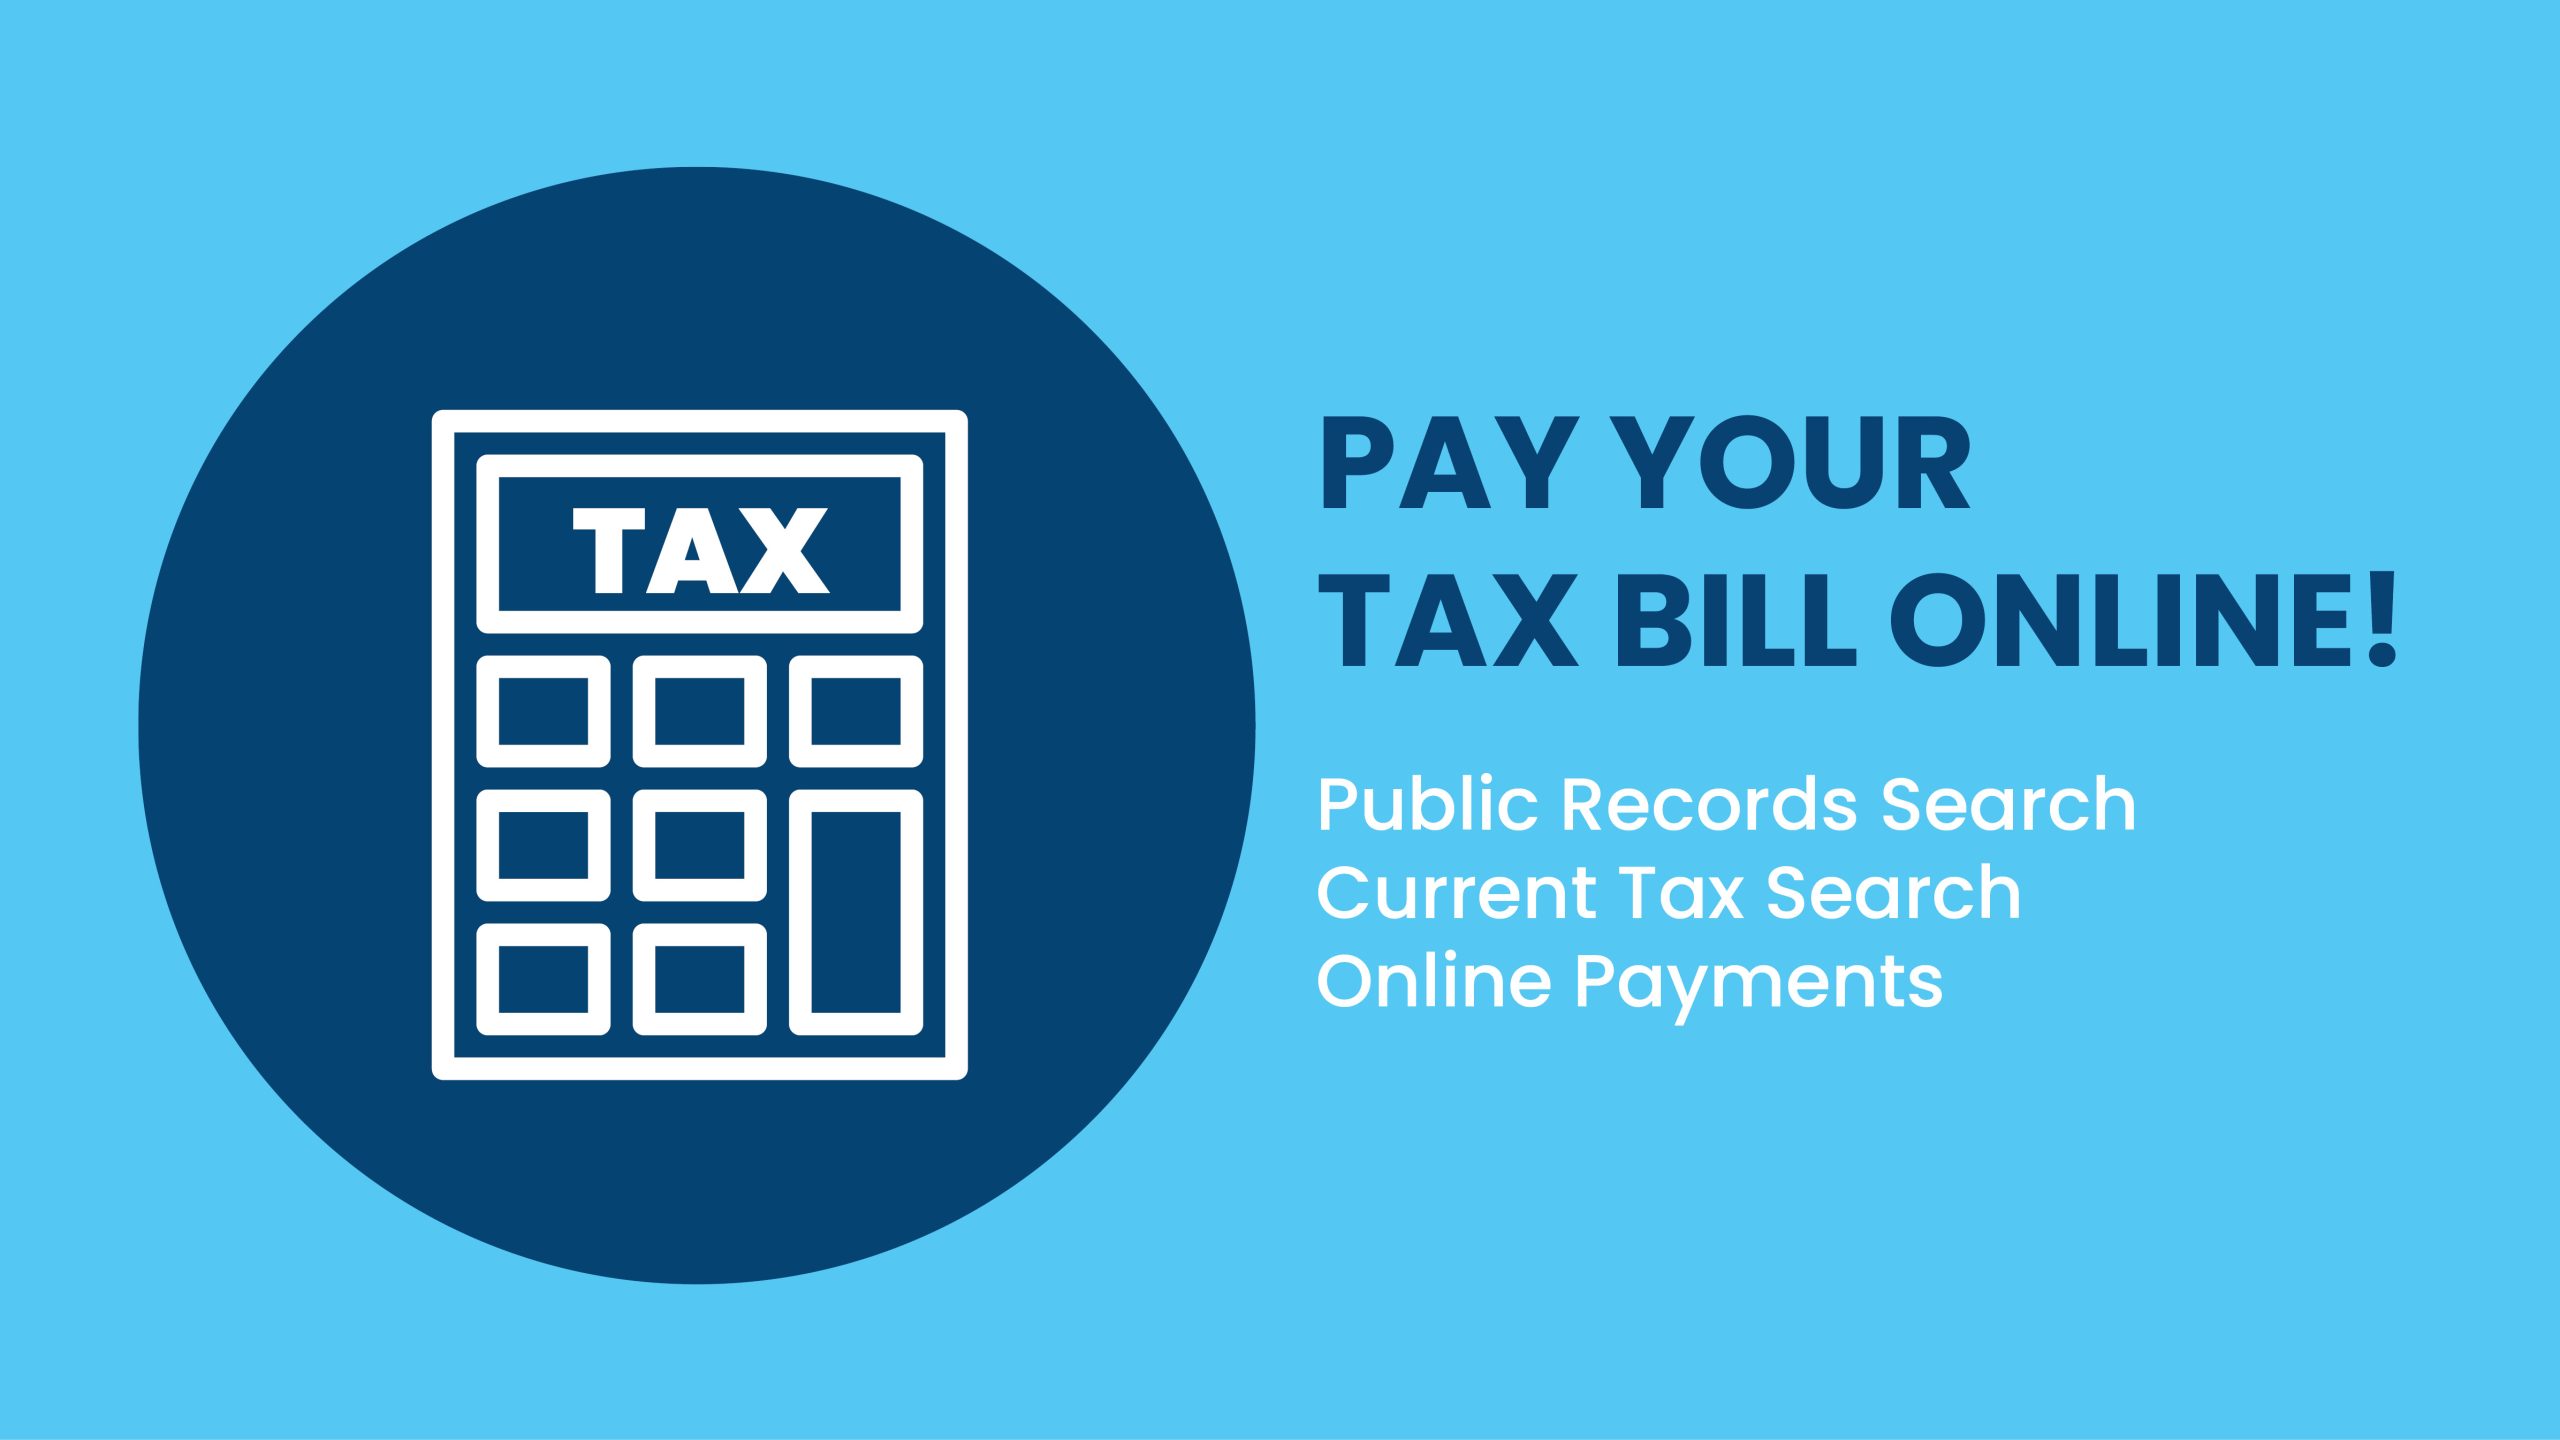 Pay Your Tax Bill Online